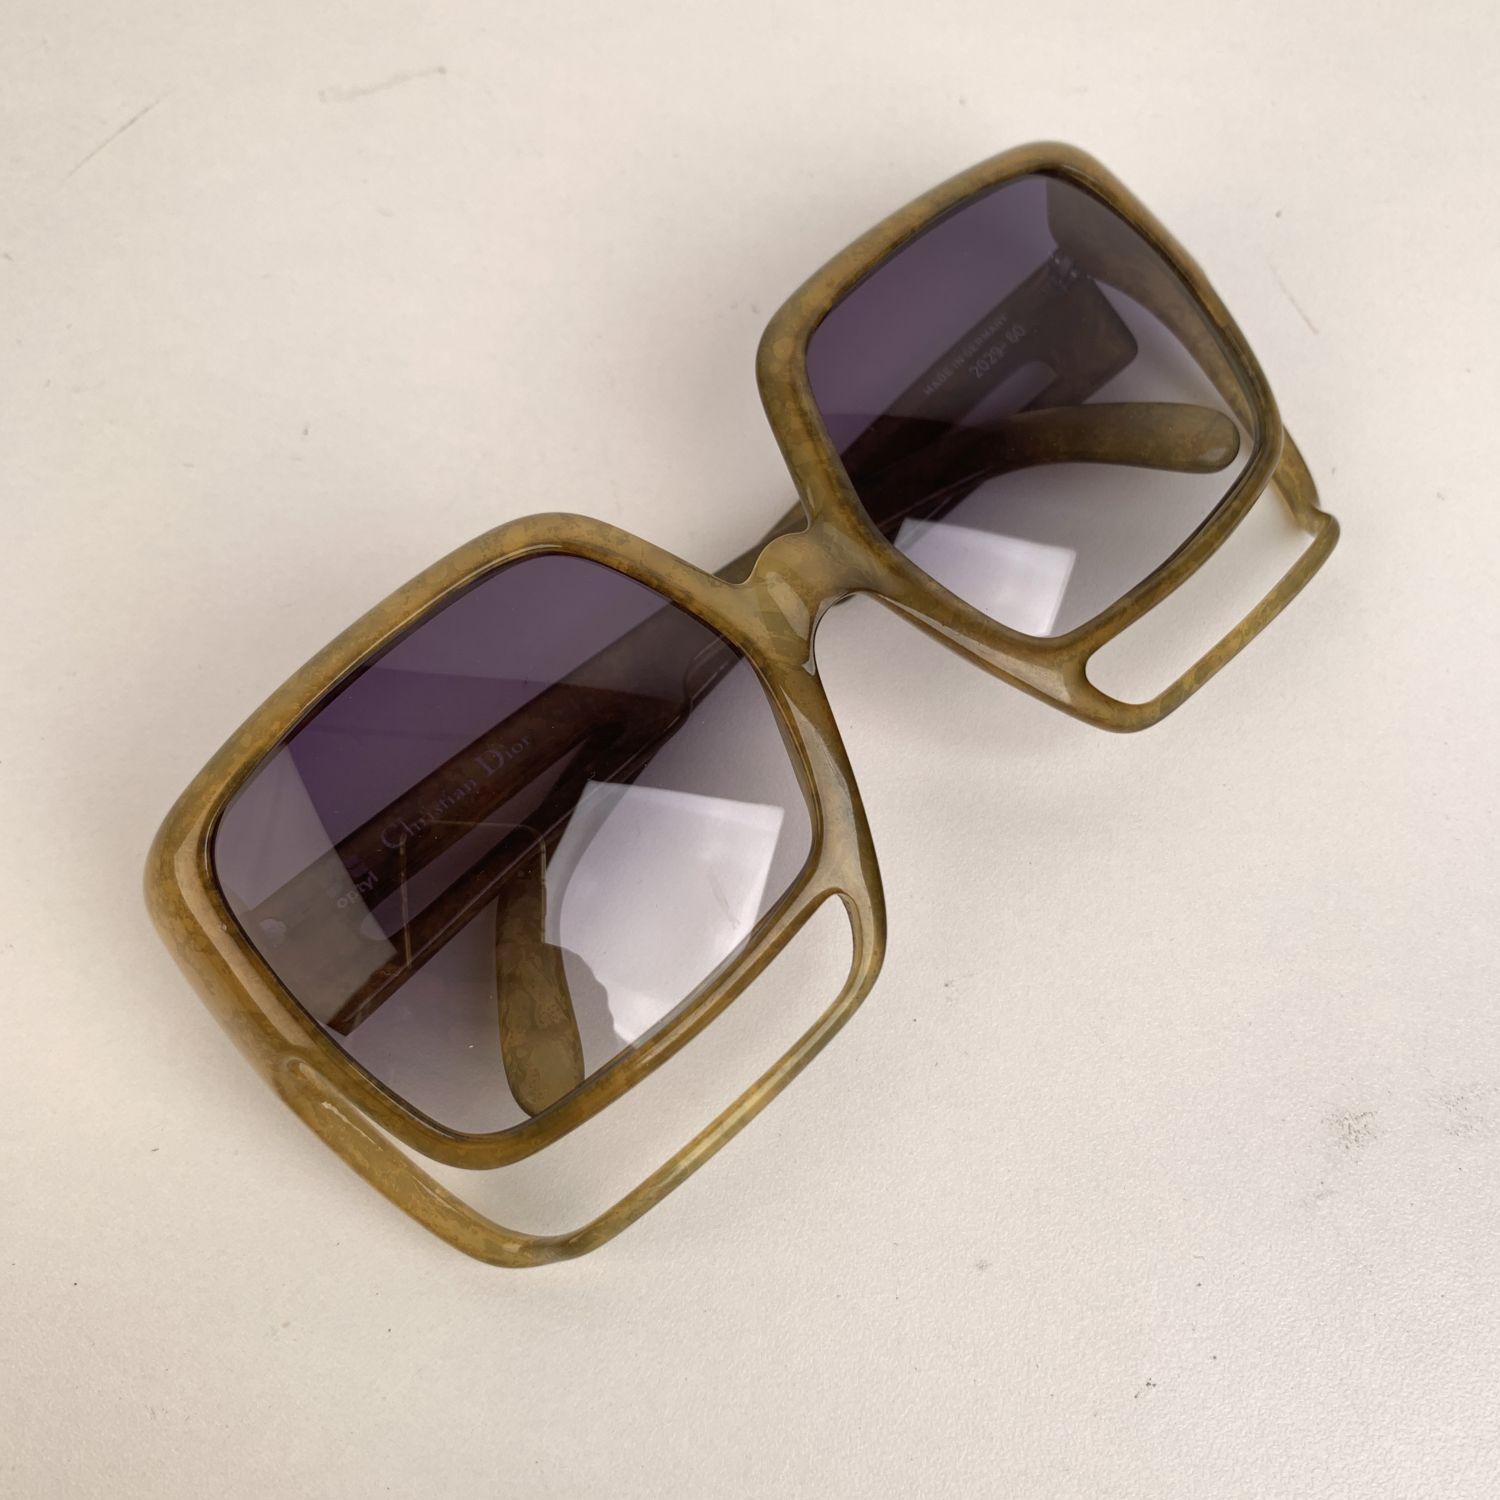 Supreme, Spectacular vintage oversized sunglasses by CHRISTIAN DIOR. Mod. 2029 - 60. Made in Germany. Cut-out details on the front. Beautiful green OPTYL frame, with blue 100% UV protection gradient lenses



Details

MATERIAL: Acetate

COLOR: